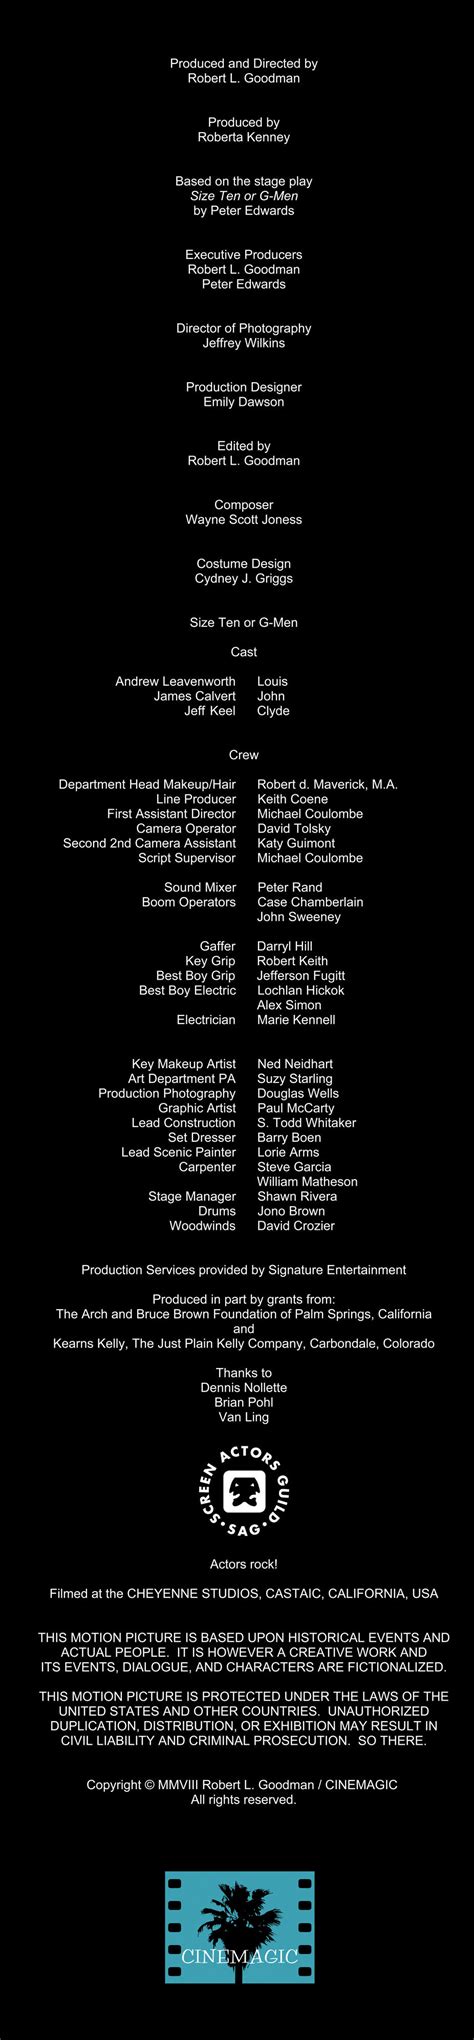 Shaping the Masterpiece lyrics credits, cast, crew of song